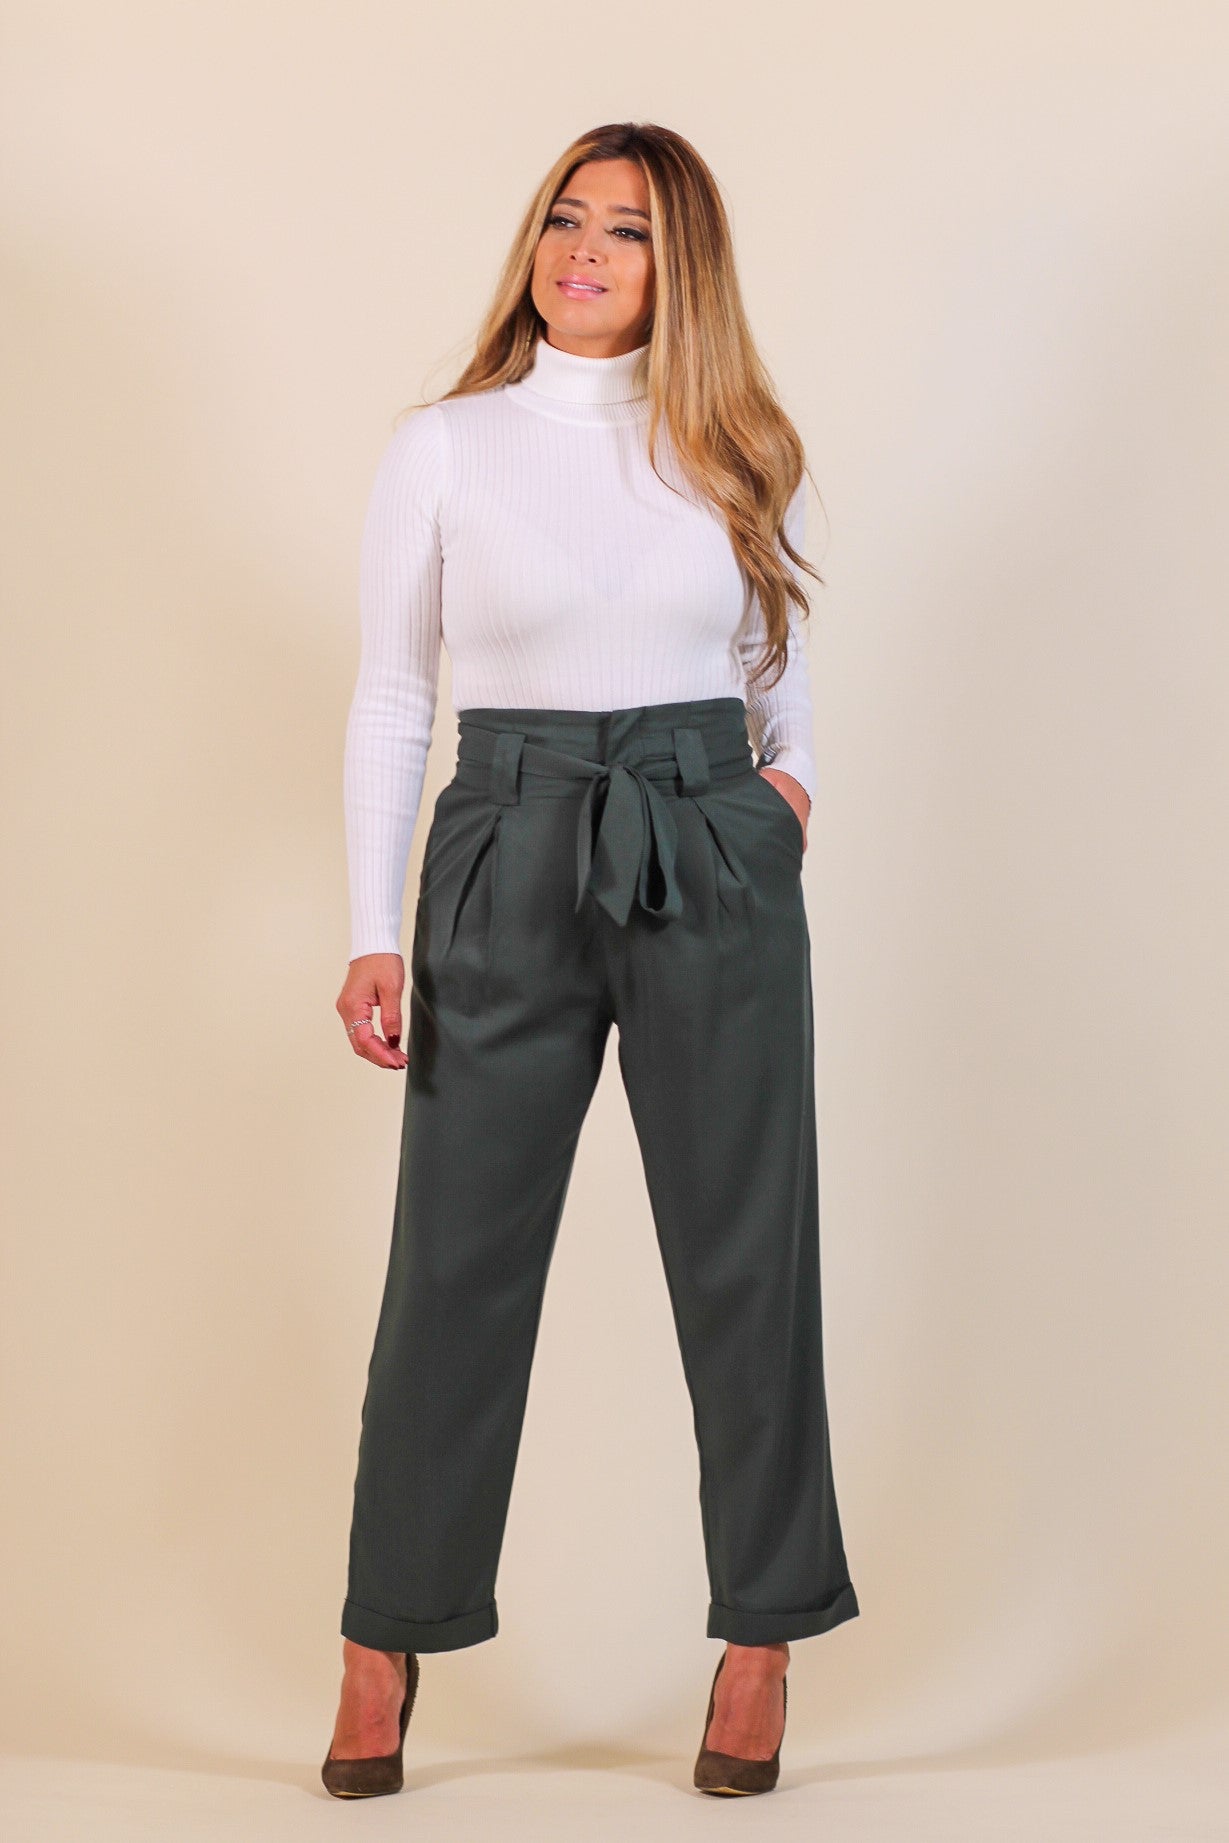 SweatyRocks Women's Striped High Waisted Wide Leg Belted Pants Loose Fit Paper  Bag Trousers Khaki S at Amazon Women's Clothing store